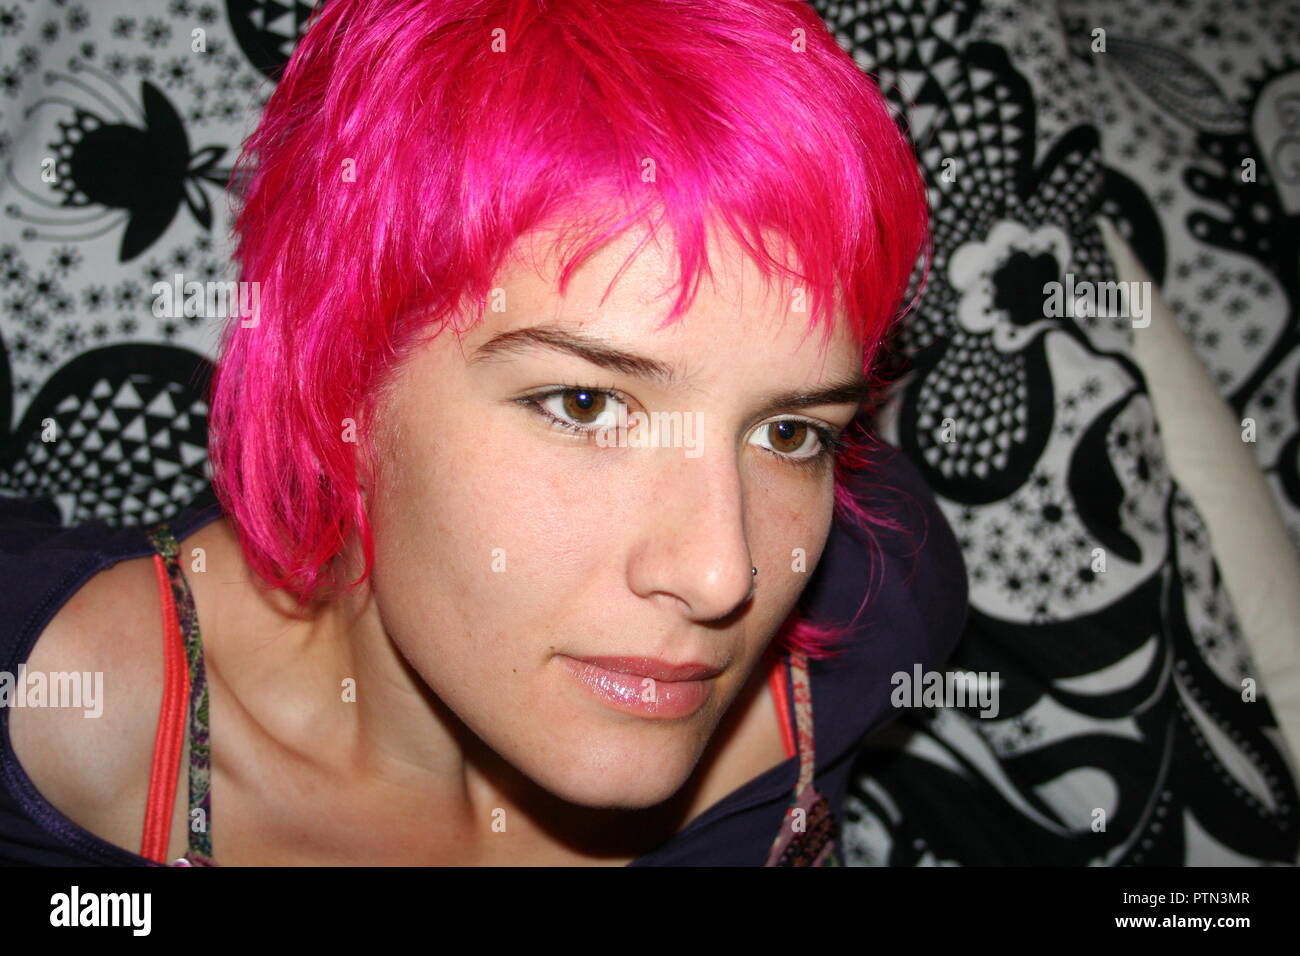 Strong, beautiful woman with dyed hair. Stock Photo